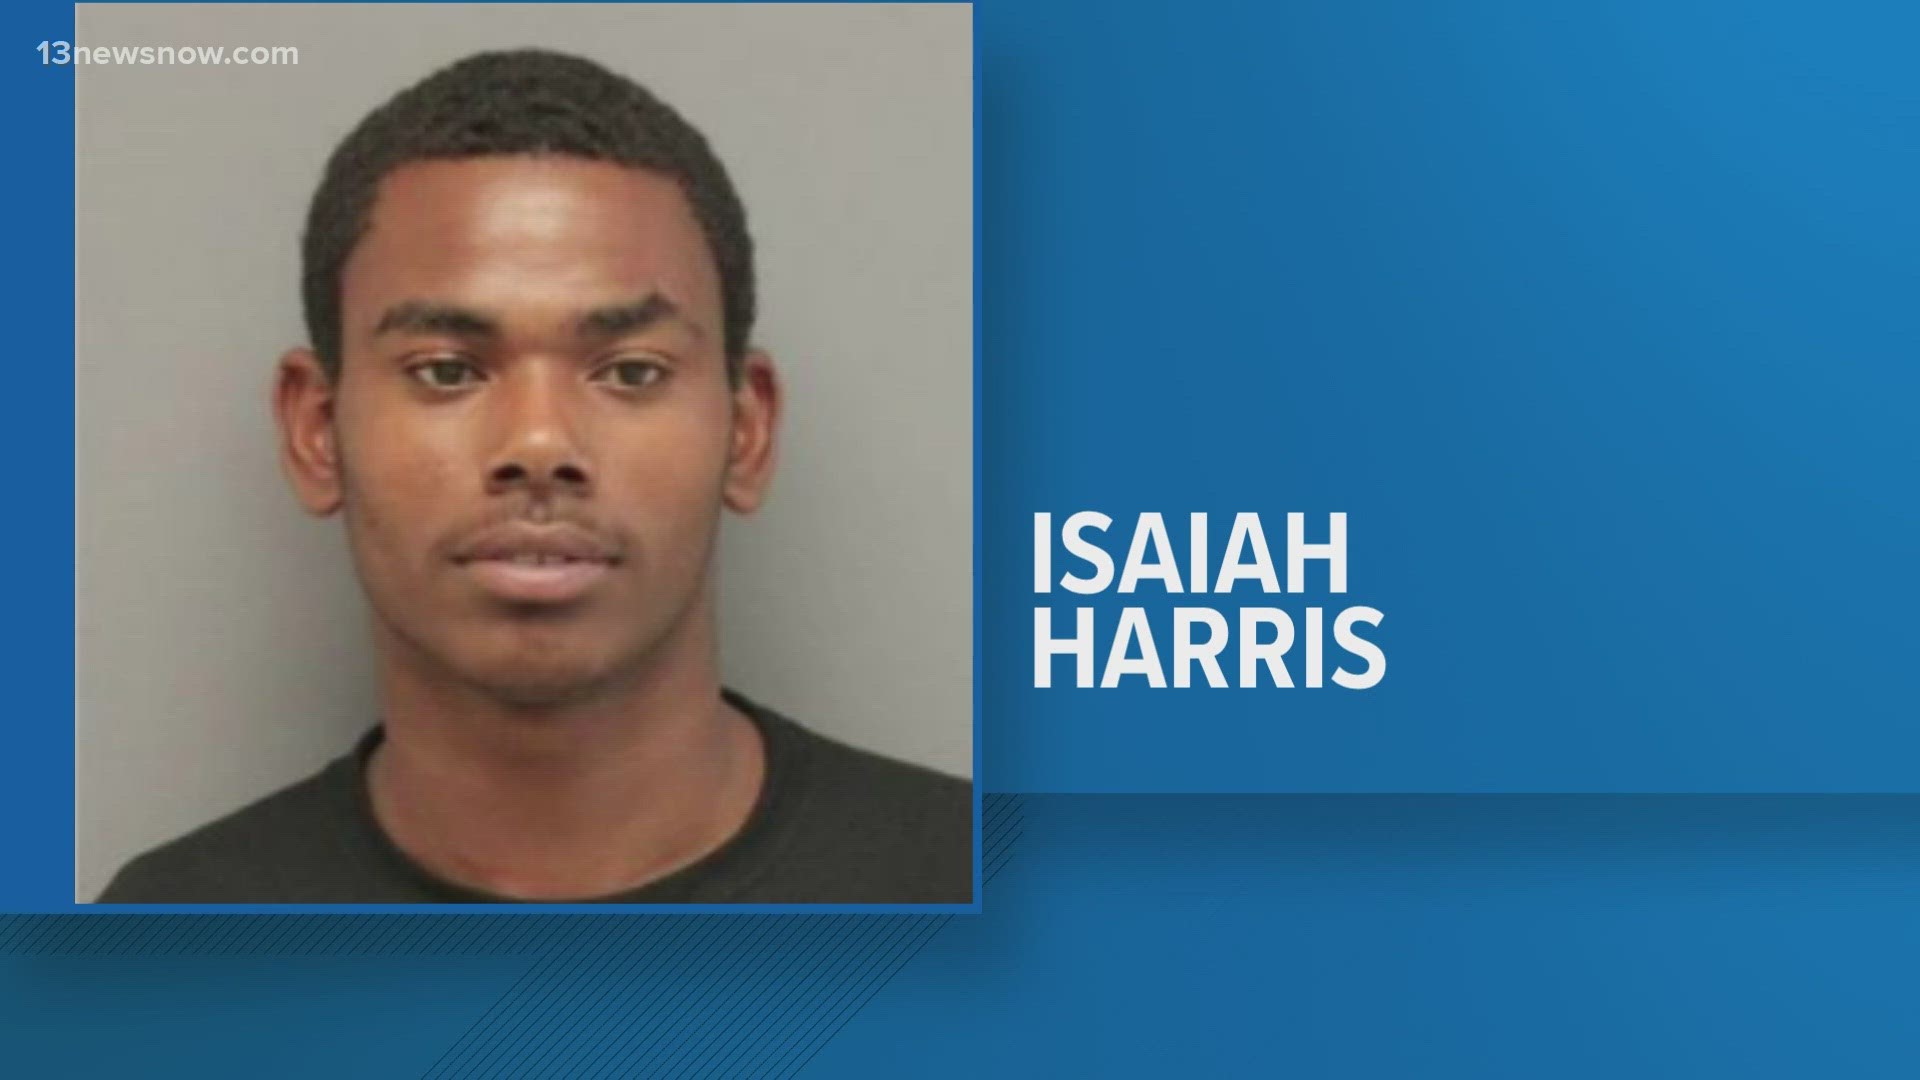 25-year-old Isaiah Daqwon Harris of Newport News is wanted in connection to the murder of 29-year-old Travell "Trey" Giles of Newport News.